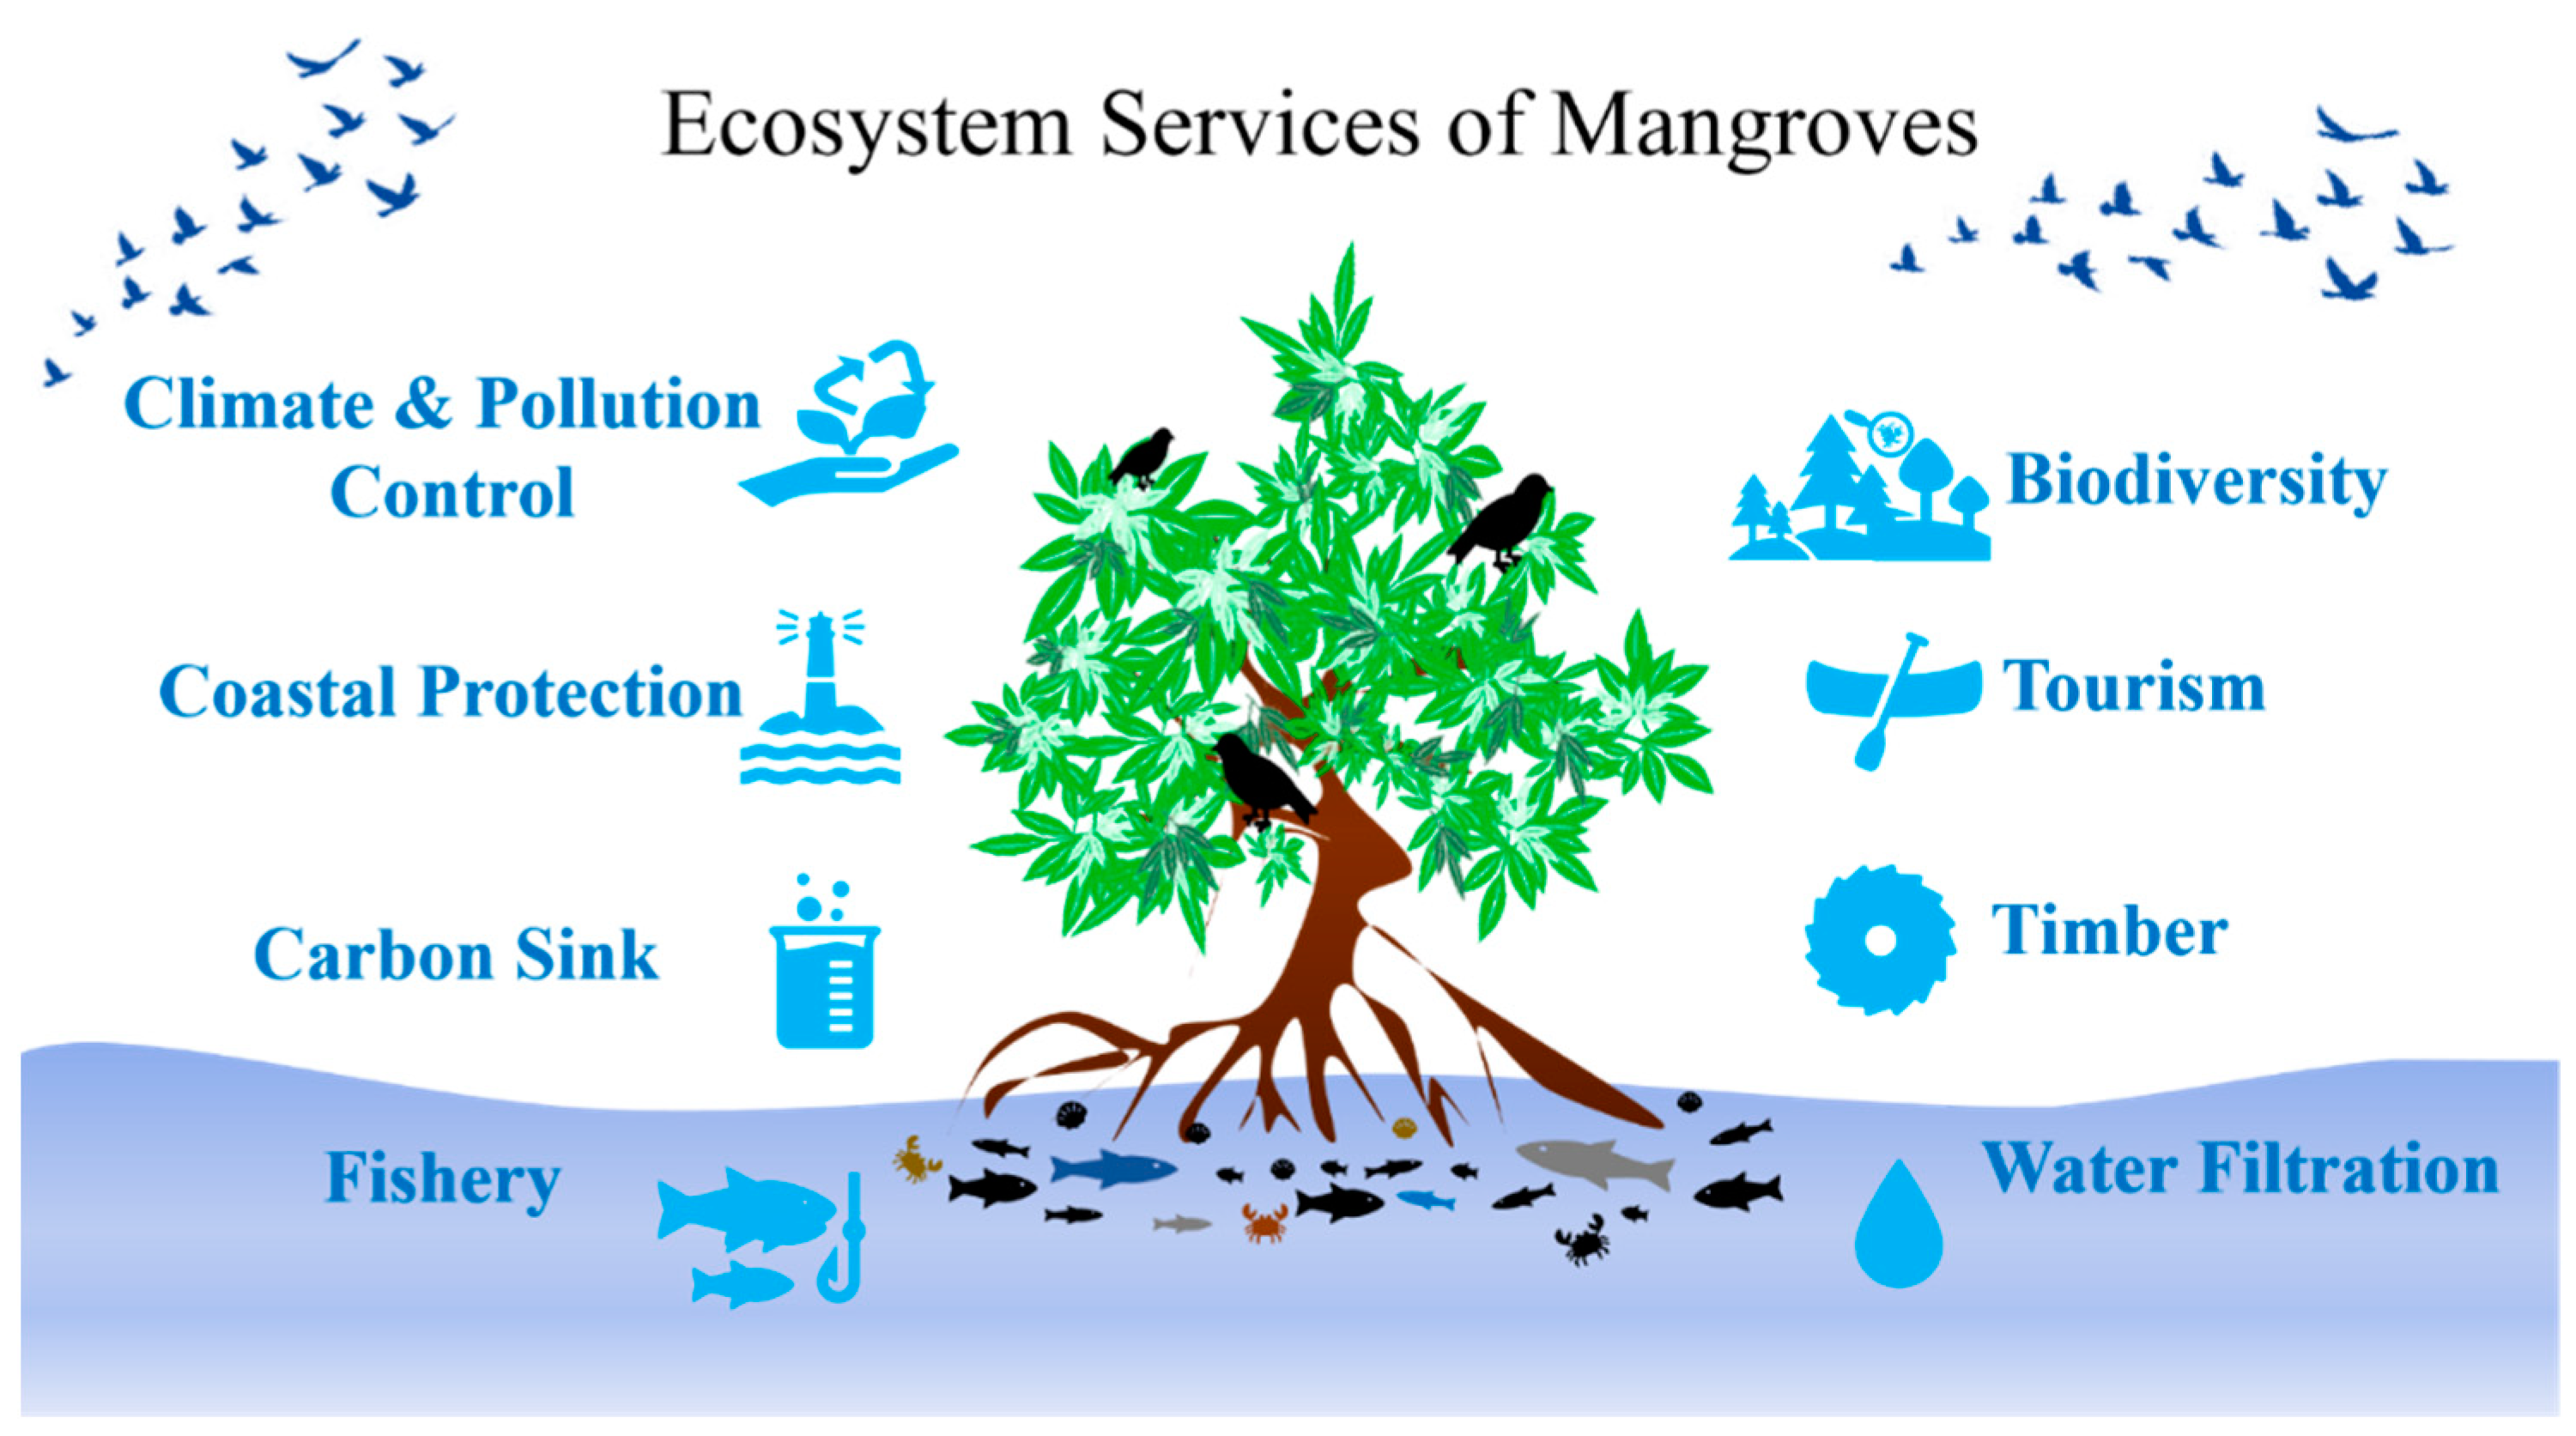 Biodiversity Introduction Graphic Organizer. Diversity of Species Level of  variety varies in different ecosystems Not all species on Earth have been  identified. - ppt download